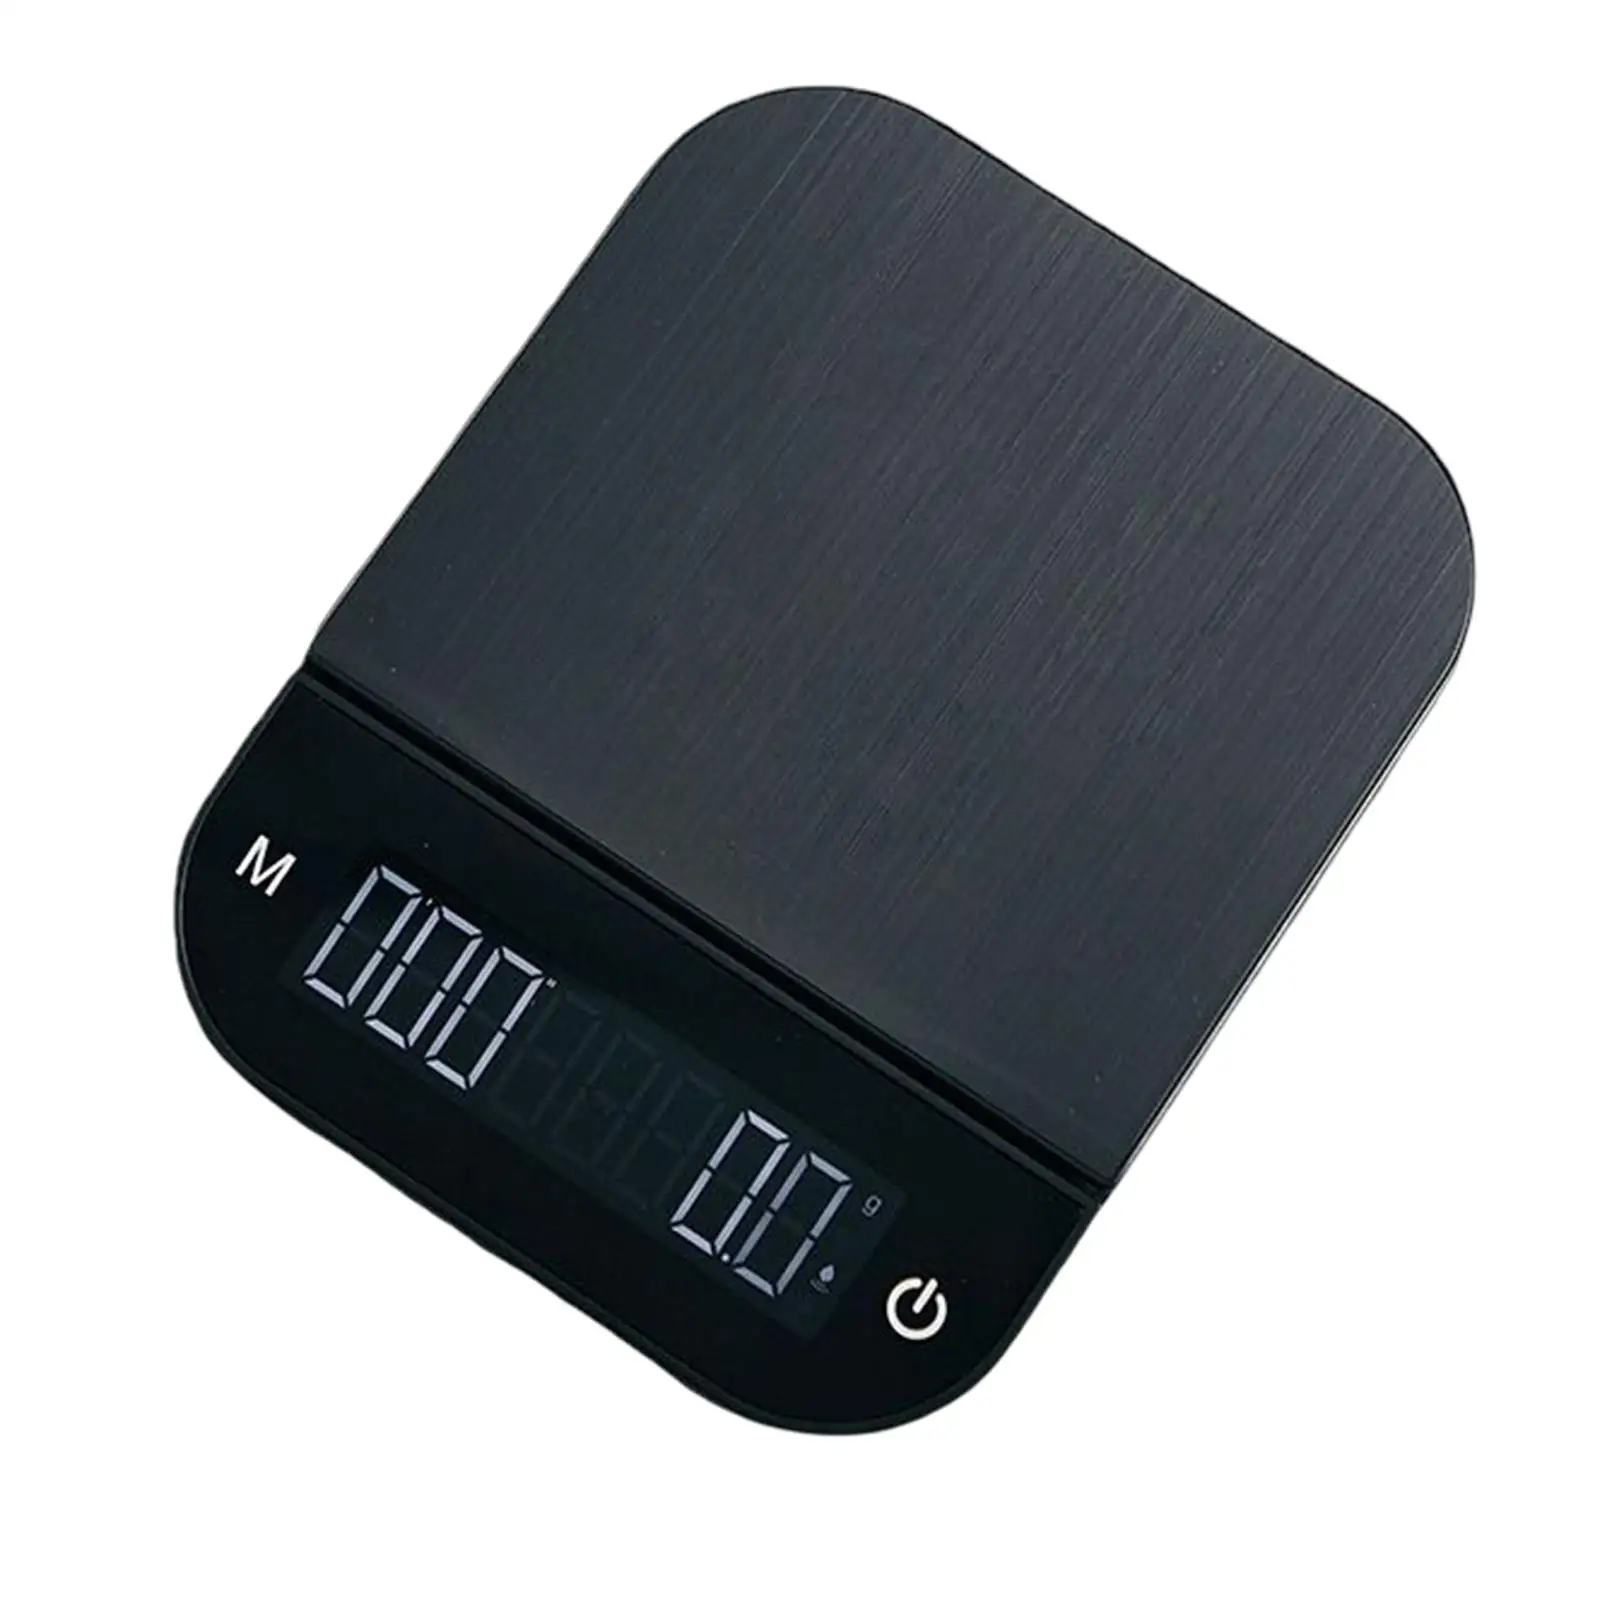 Electronic Coffee Weighing, Durable Accurate Food Weighing with LED Display